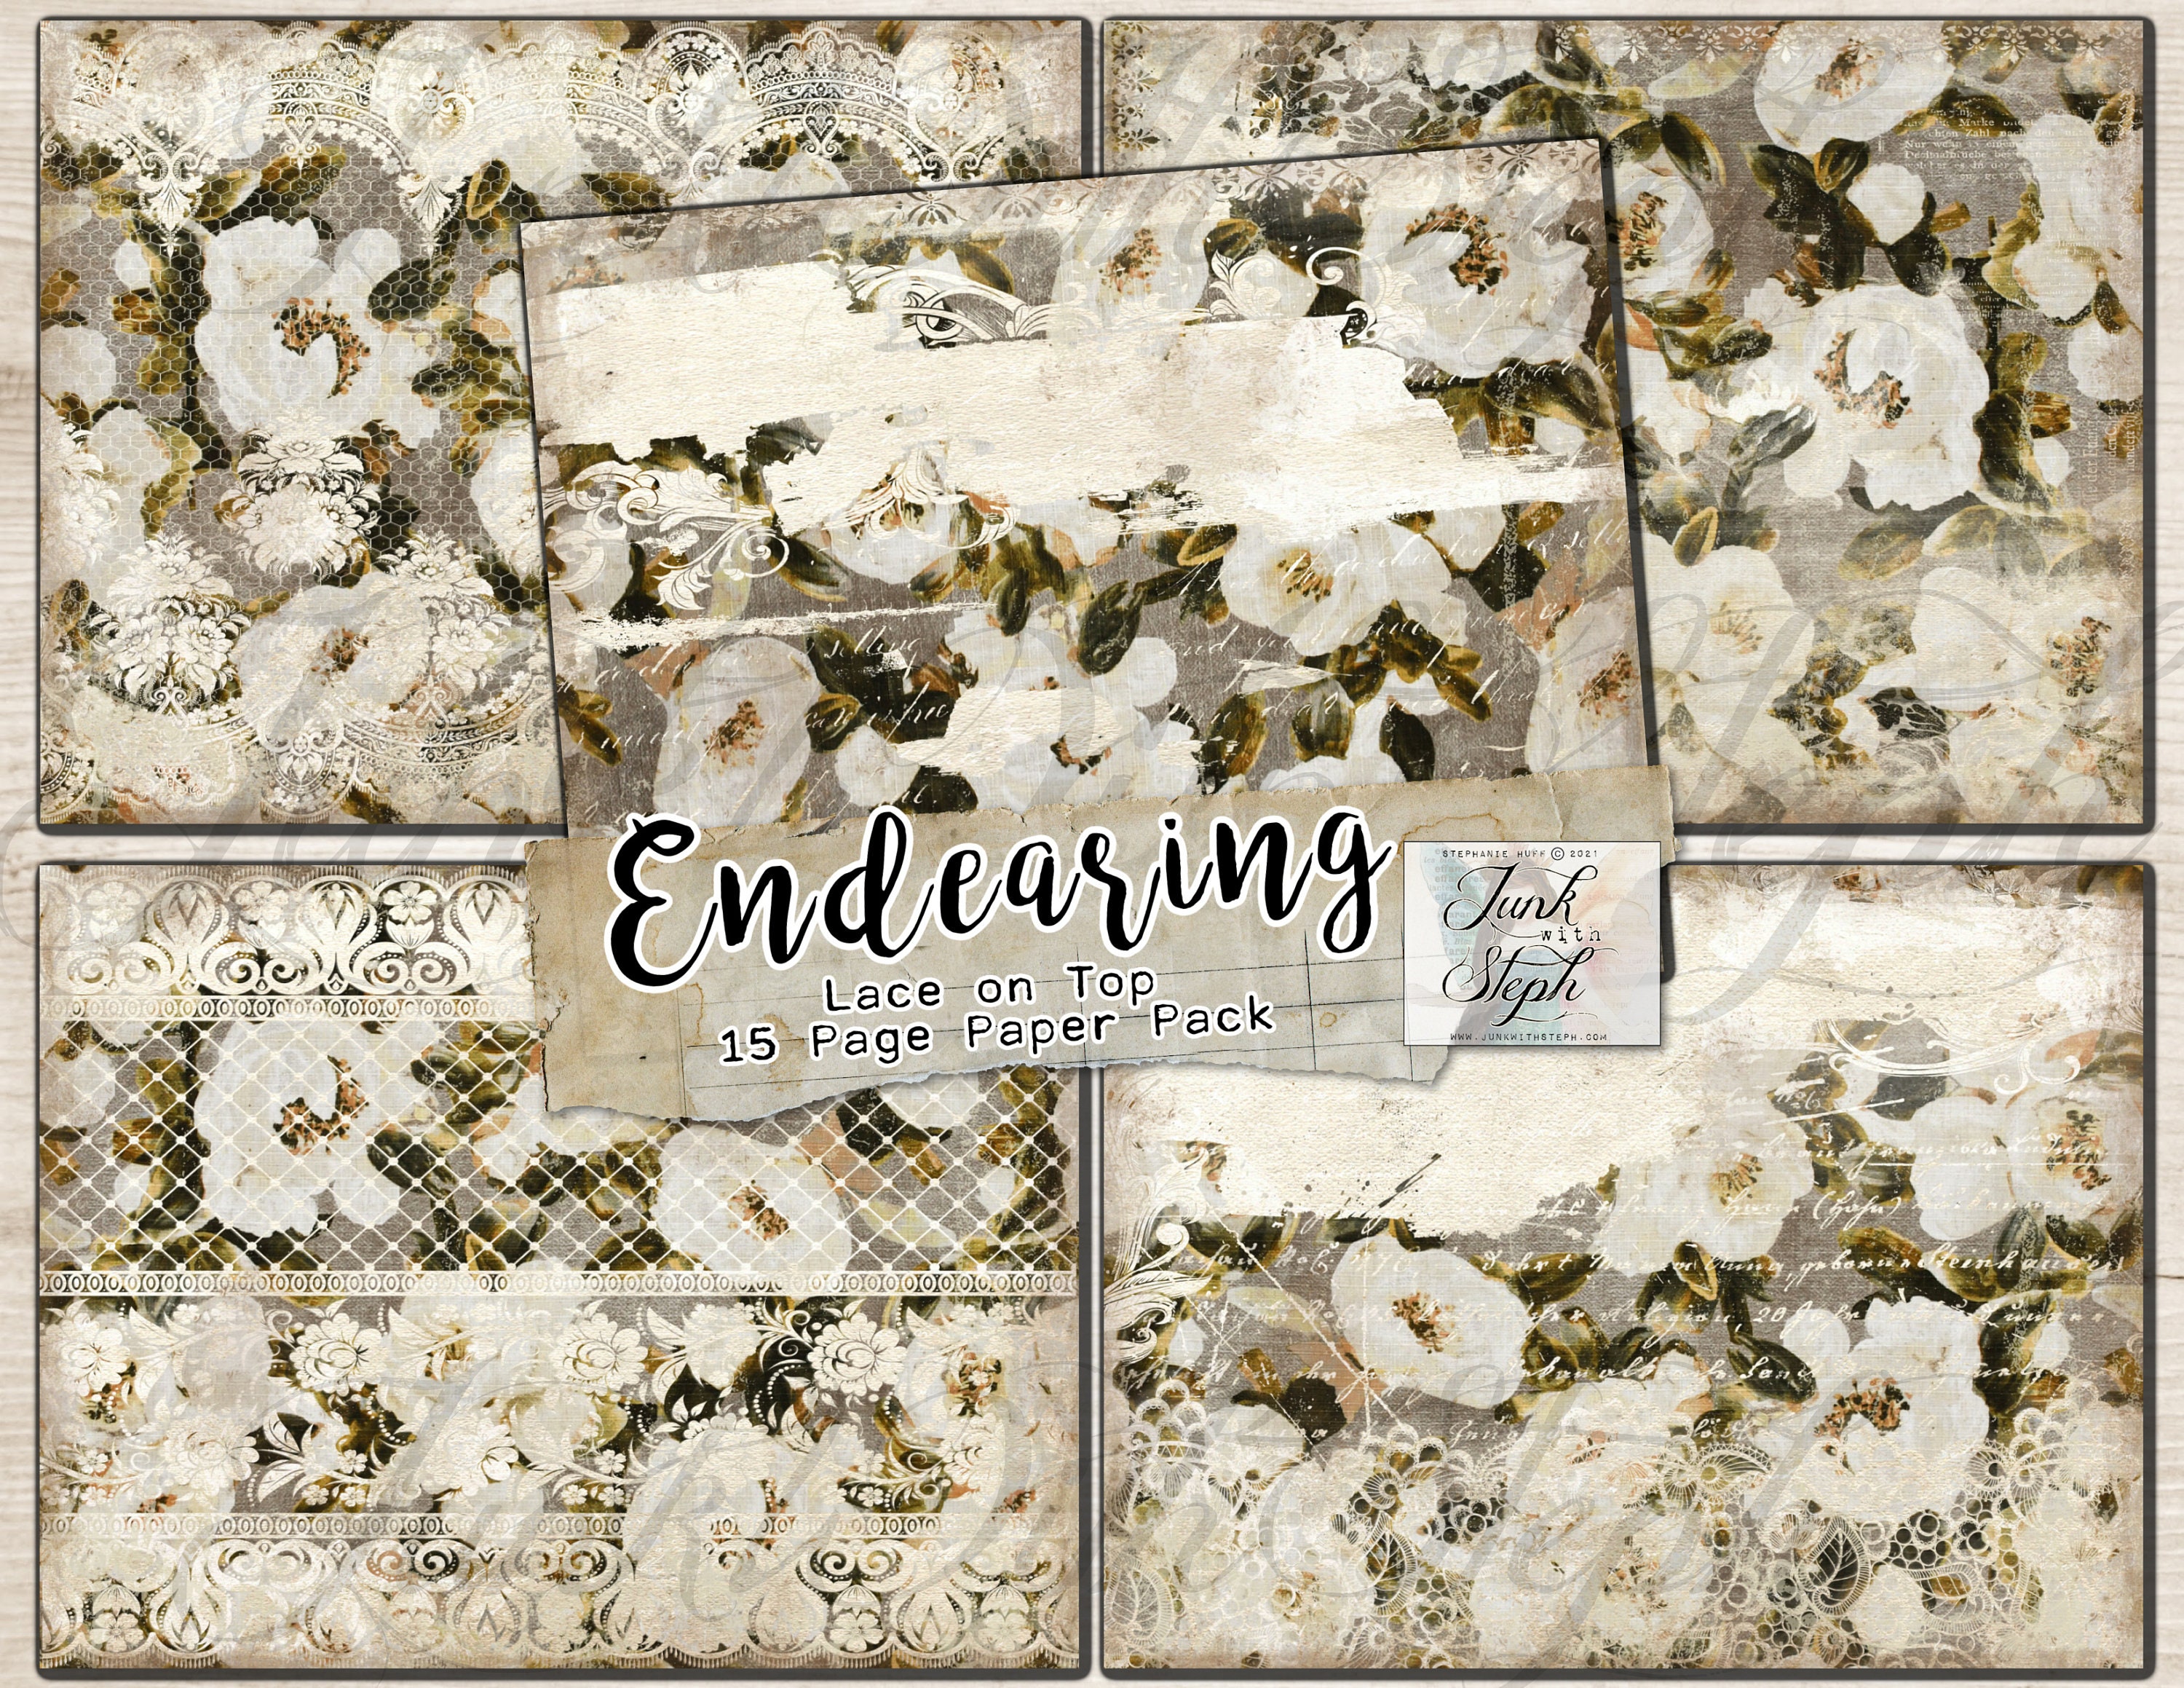 Endearing Lace on TOP Paper Pack: 15 Page Color Textured Background Creamy  Lace INSTANT Download Printable Junk Journal Pages Scrapbook -  Ireland